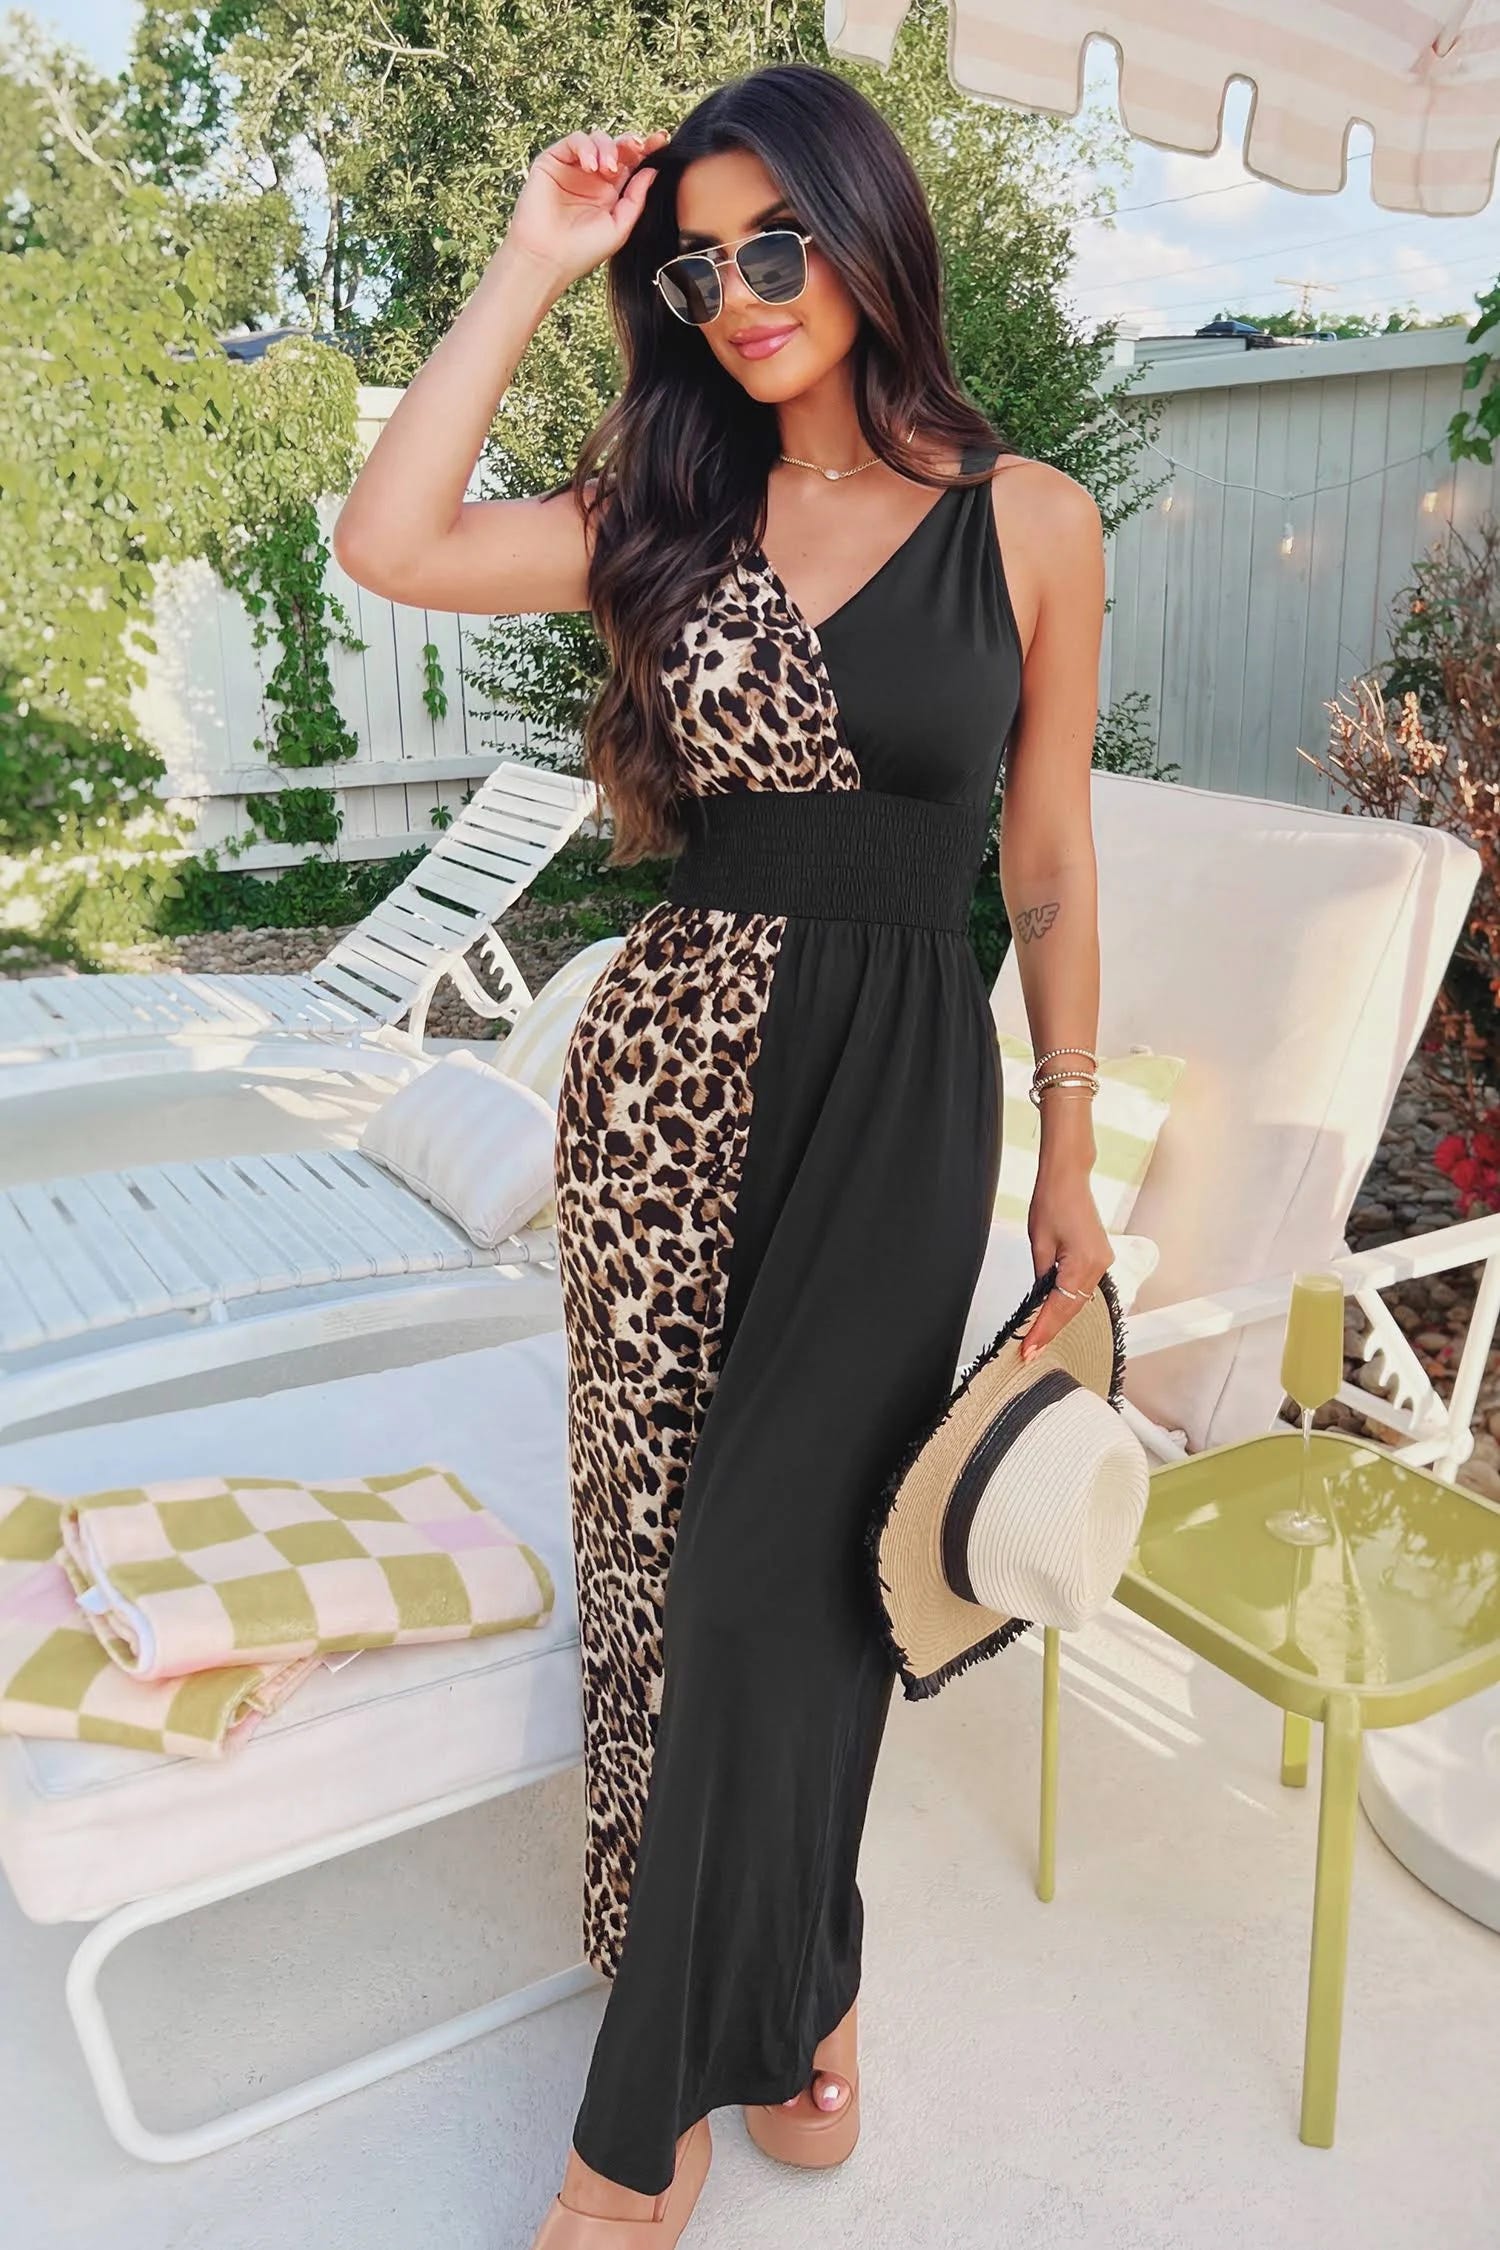 Vibrant Leopard Print Maxi Dress with V-neckline and Knotted Straps | Image